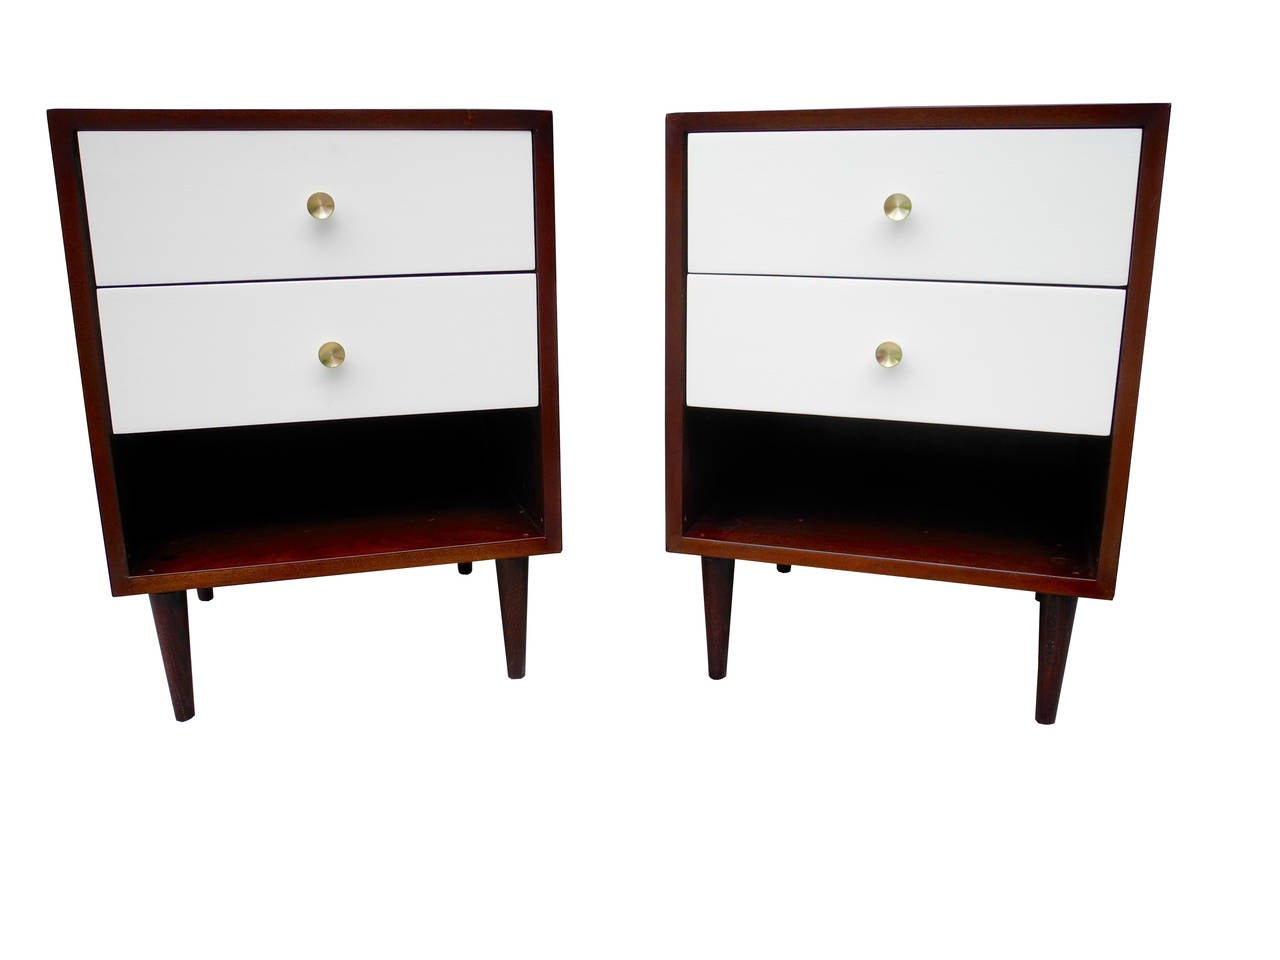 These nightstands are made of mahogany. The two drawers are painted and lacquered in off white with solid brass pulls. Mengel Model was a 1950s MoMA award winning design that interconnected and was interchangeable.